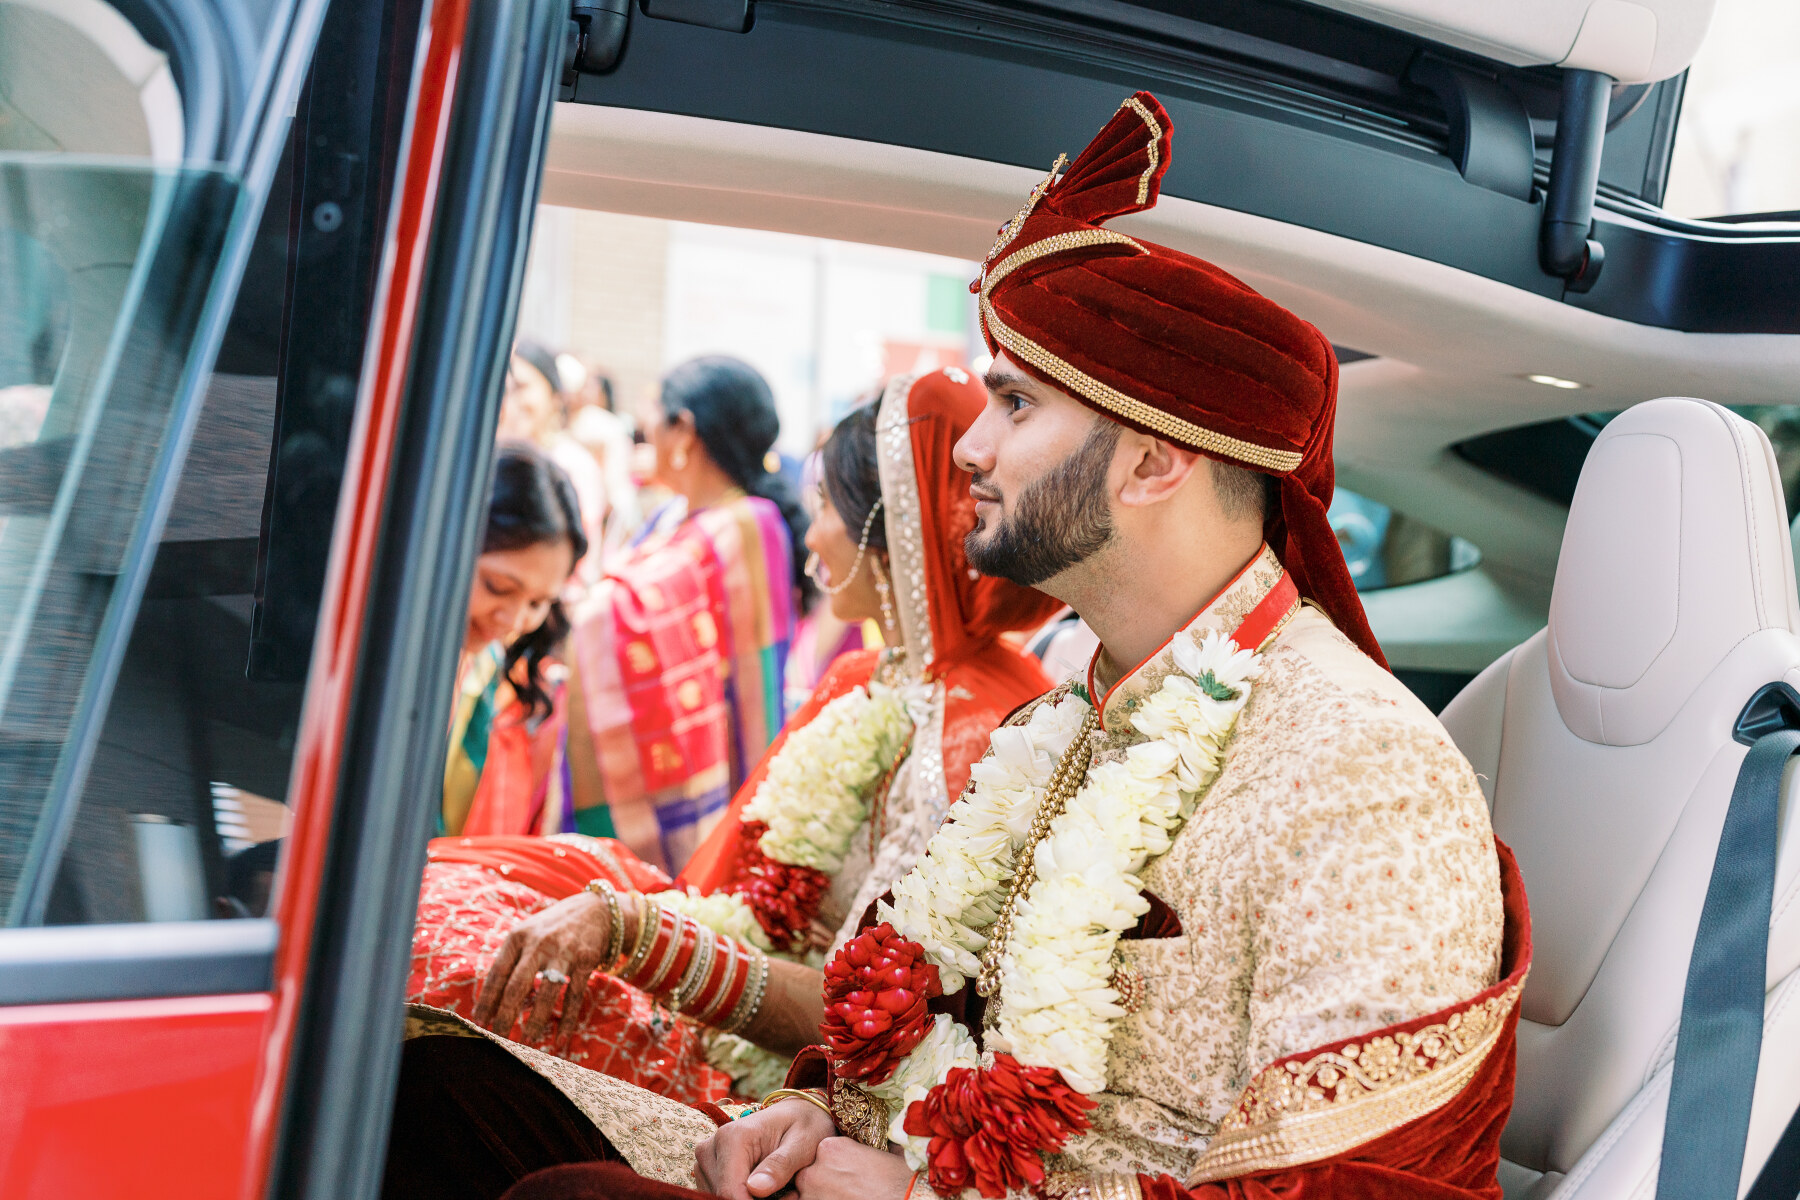 Ananya + Harsh during the Vidaai ceremony captured by Jamie Vinson Photography